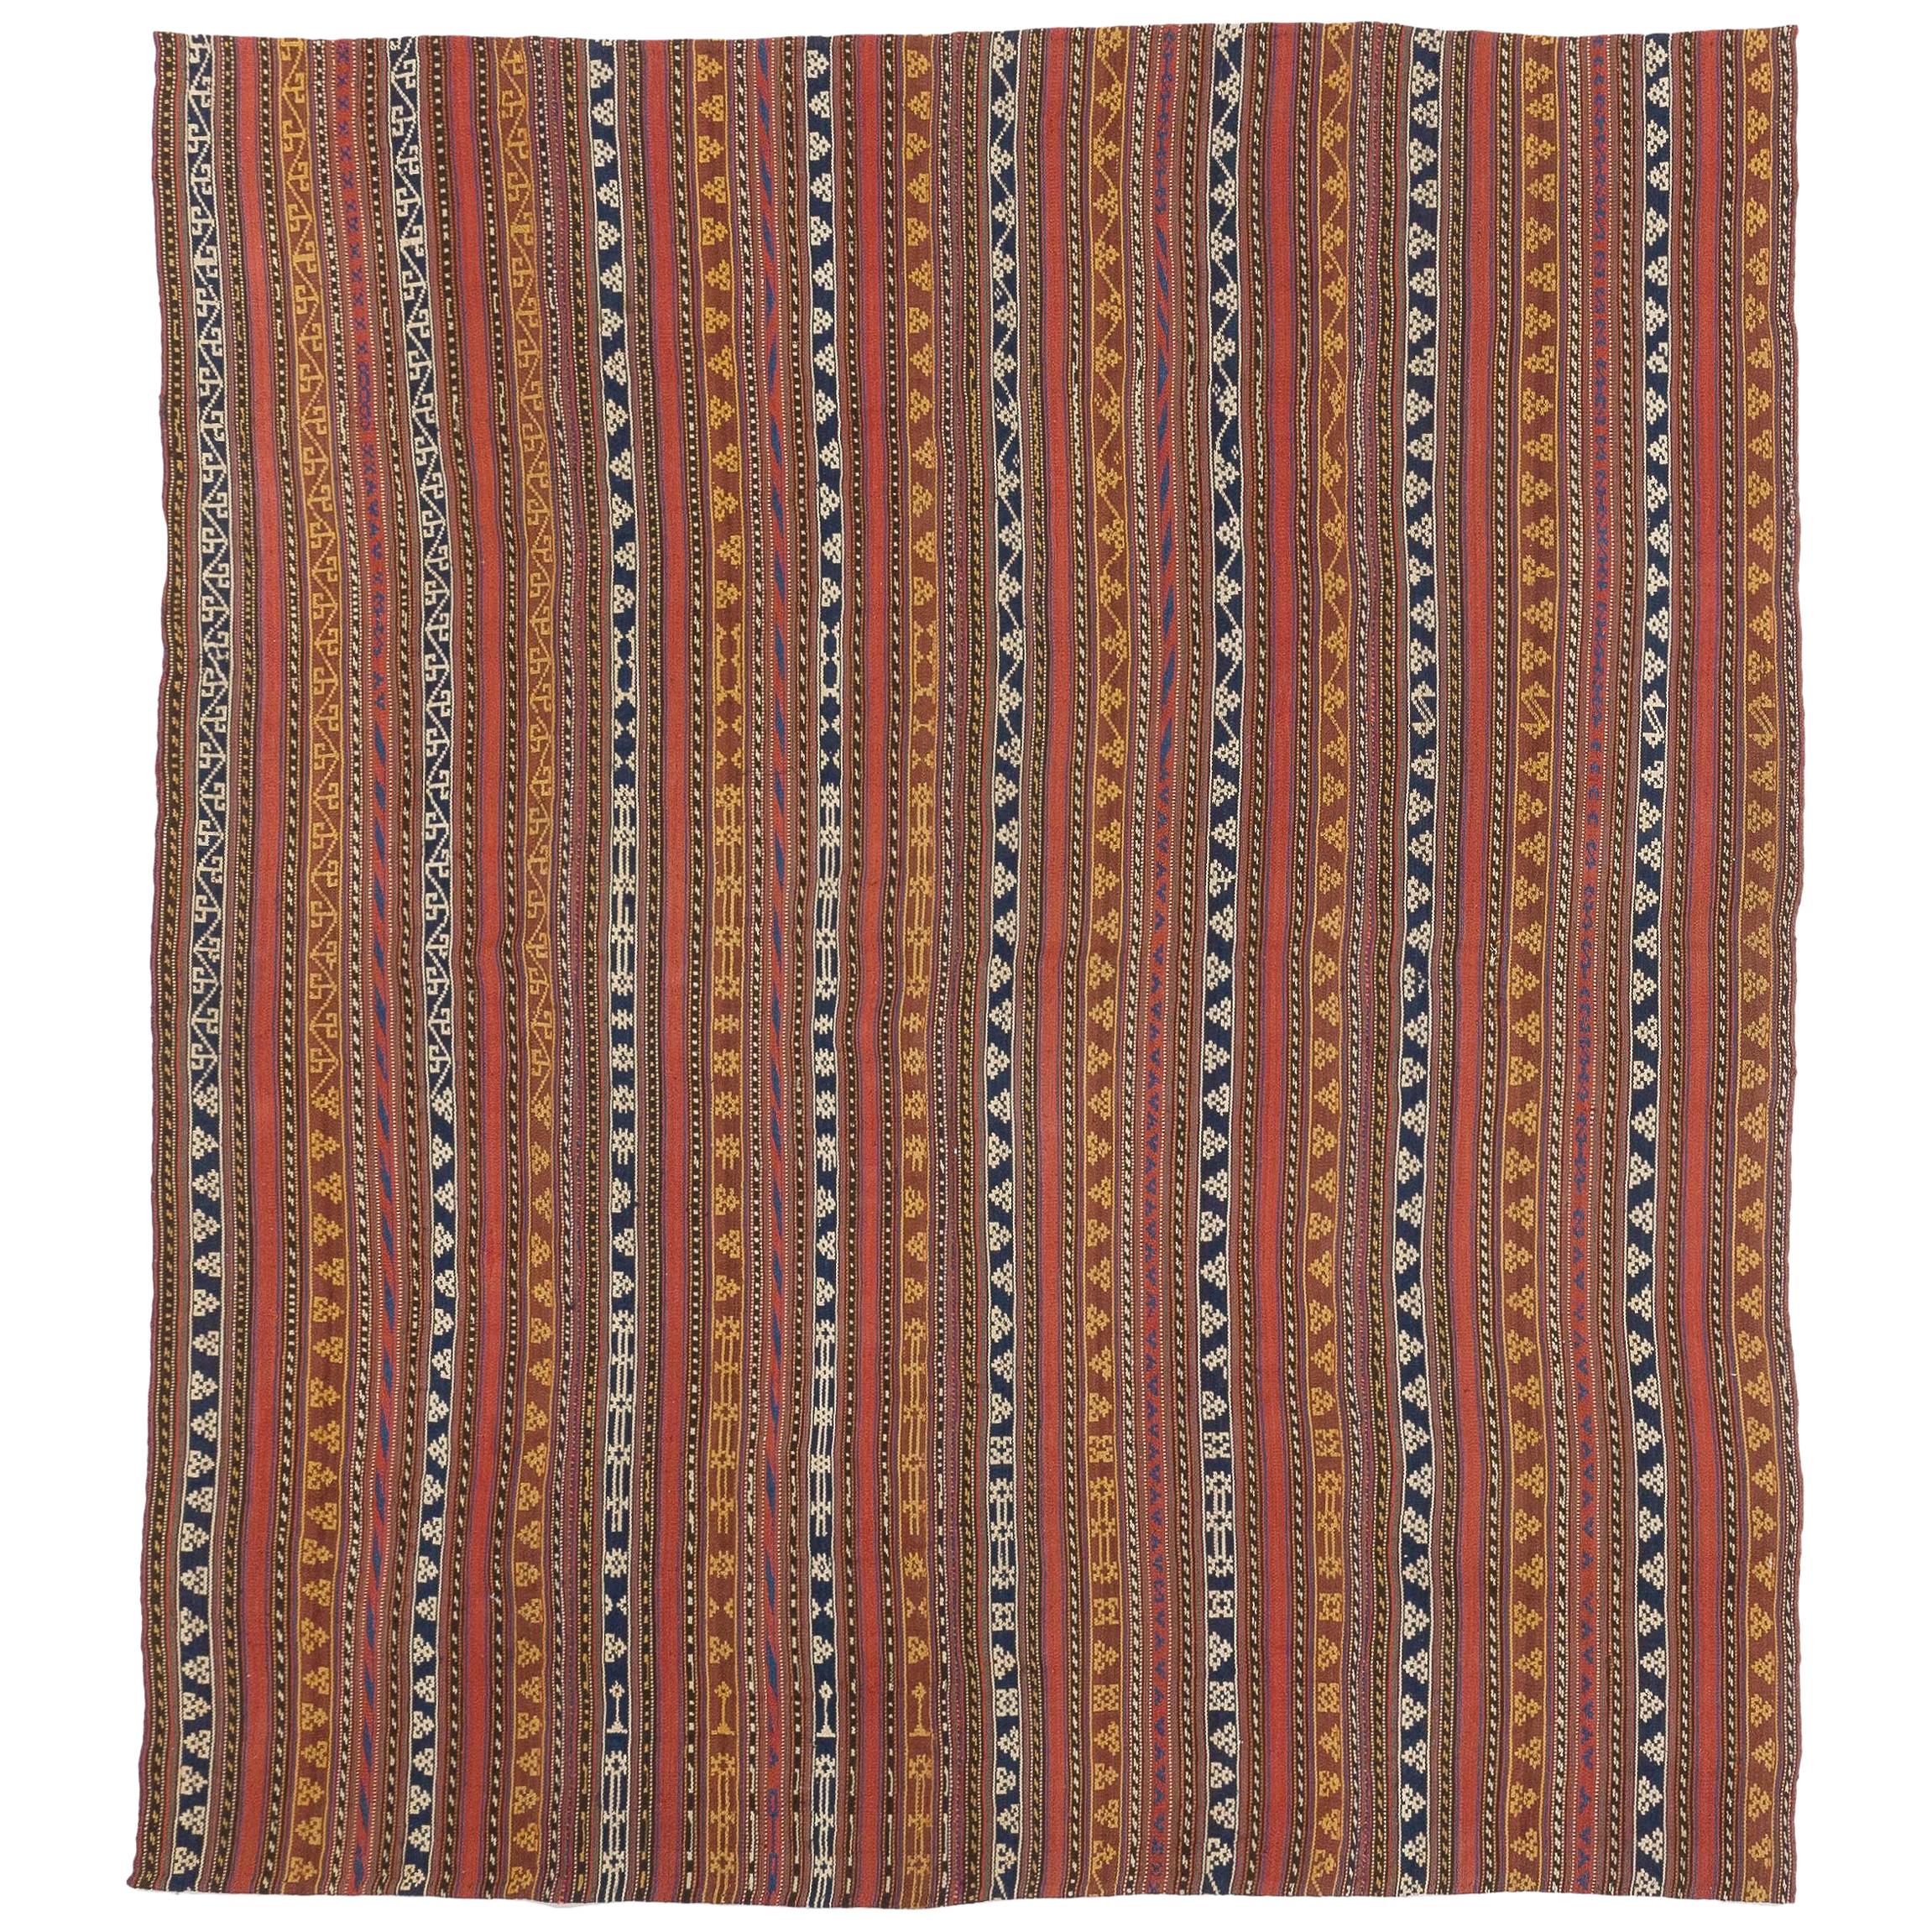 Antique Persian Flat-Weave Jajim Rug with Tribal Details on Colored Stripes